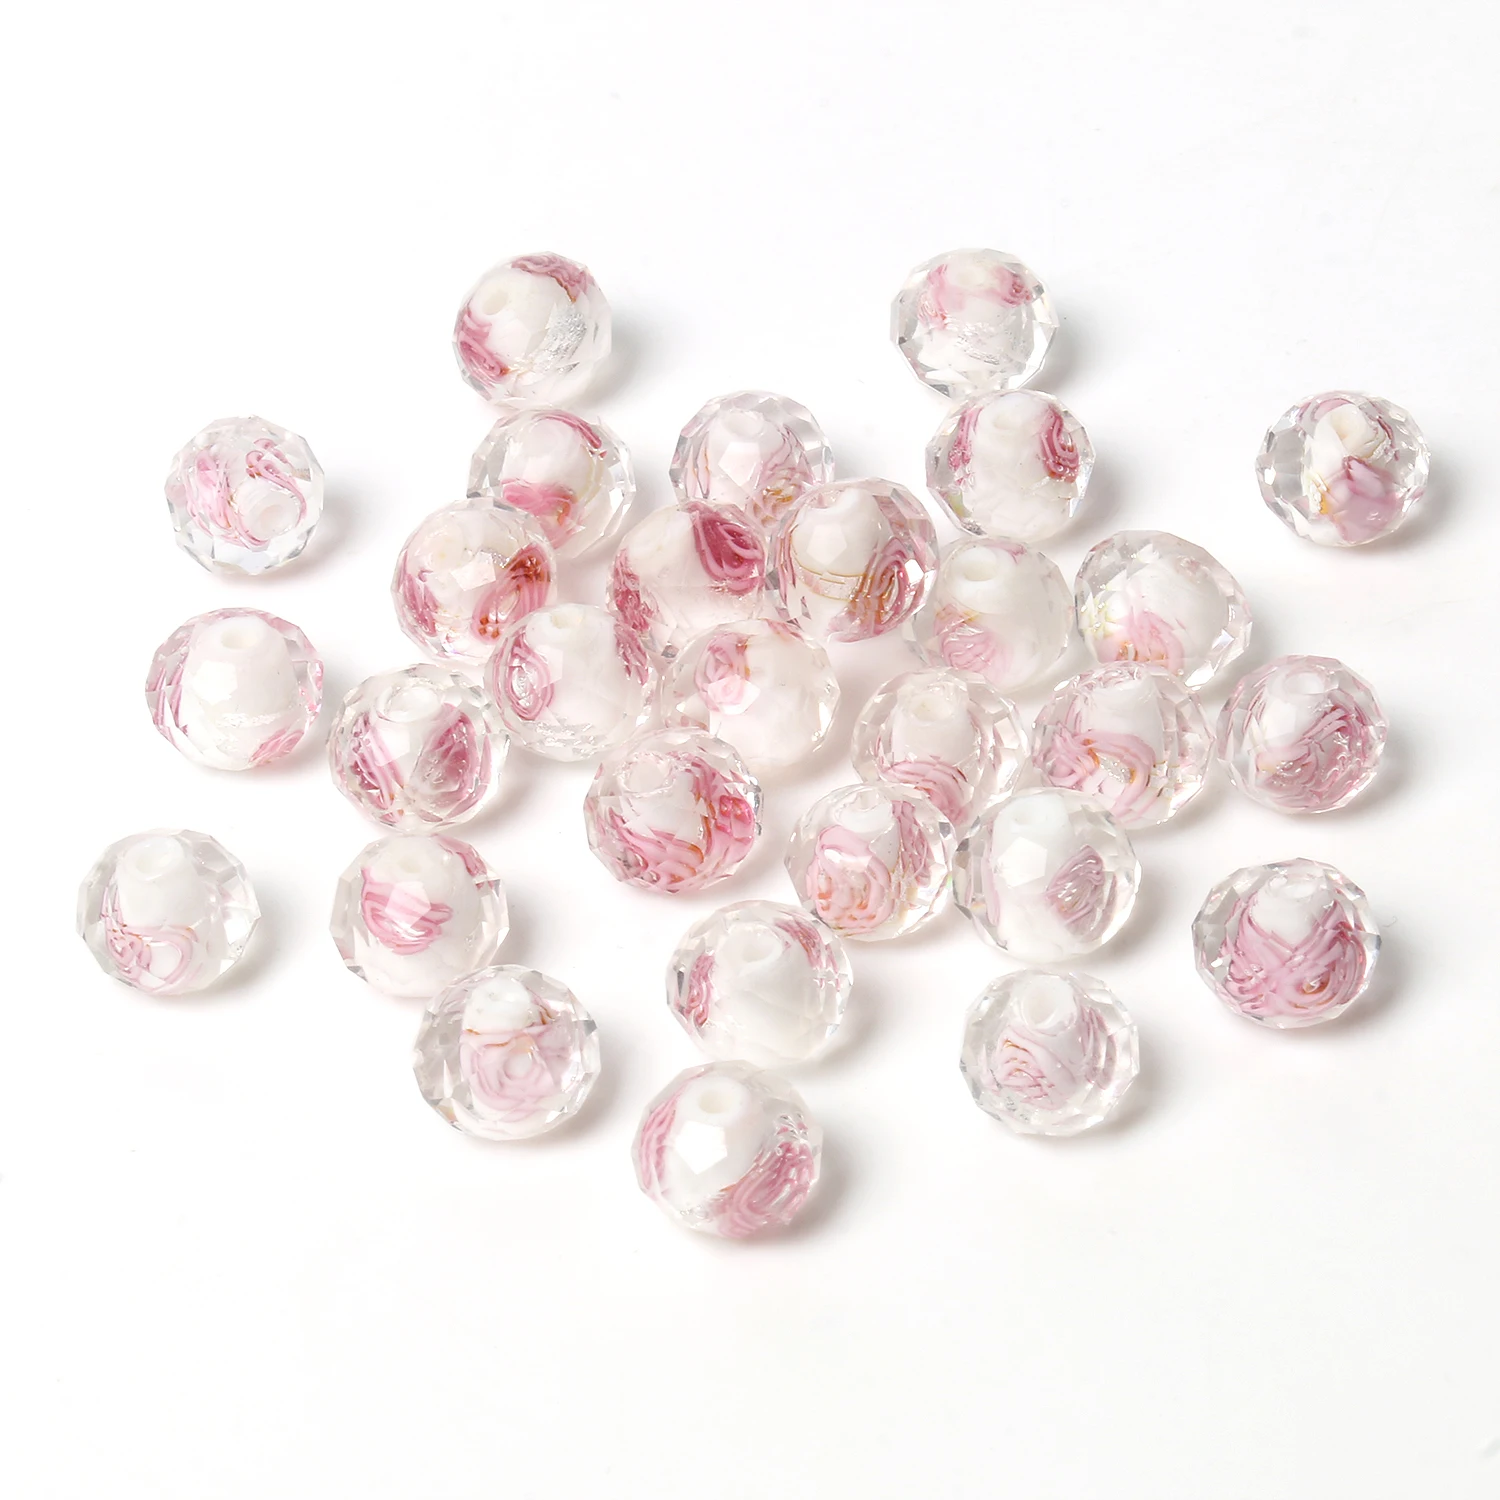 Wholesale Murano Transparent Faceted Rondelle Pink White Flower Lampwork Crystal Glass Beads for Jewelry Bracelet DIY Making